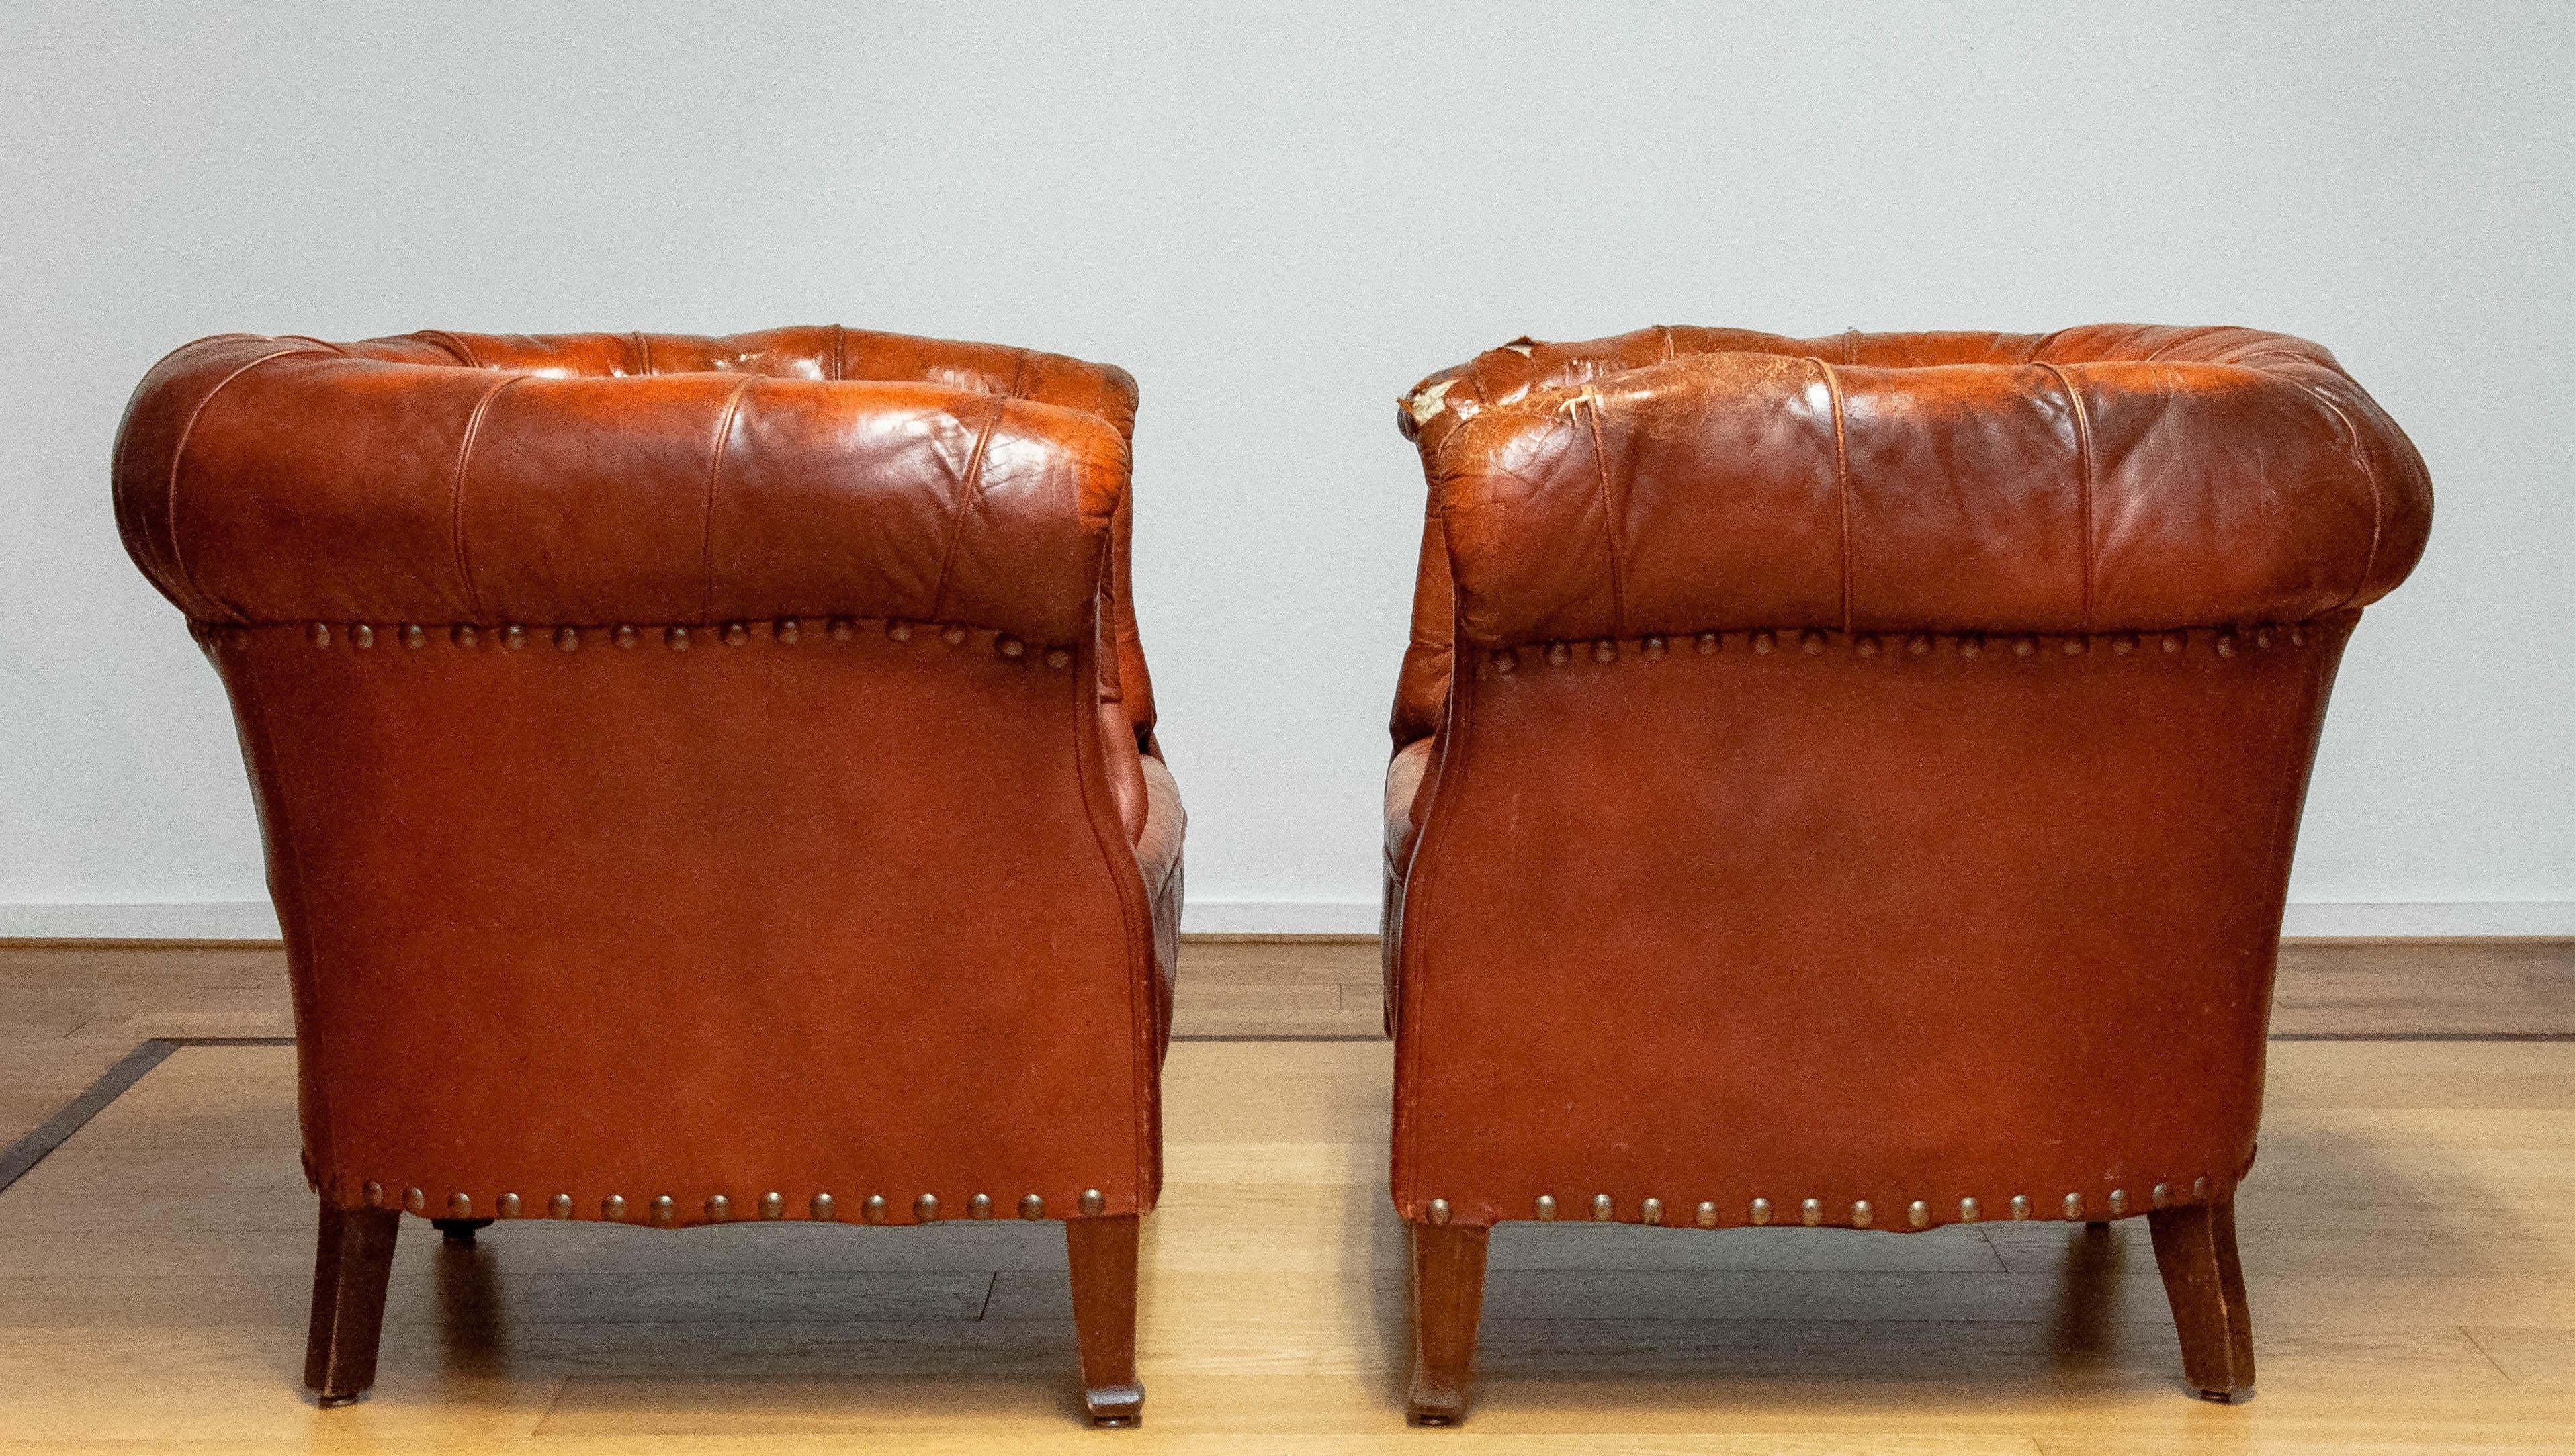 Mid-20th Century Pair 1940s Swedish Tufted Club Chair 'Chesterfield Model' Tan Brown Worn Leather